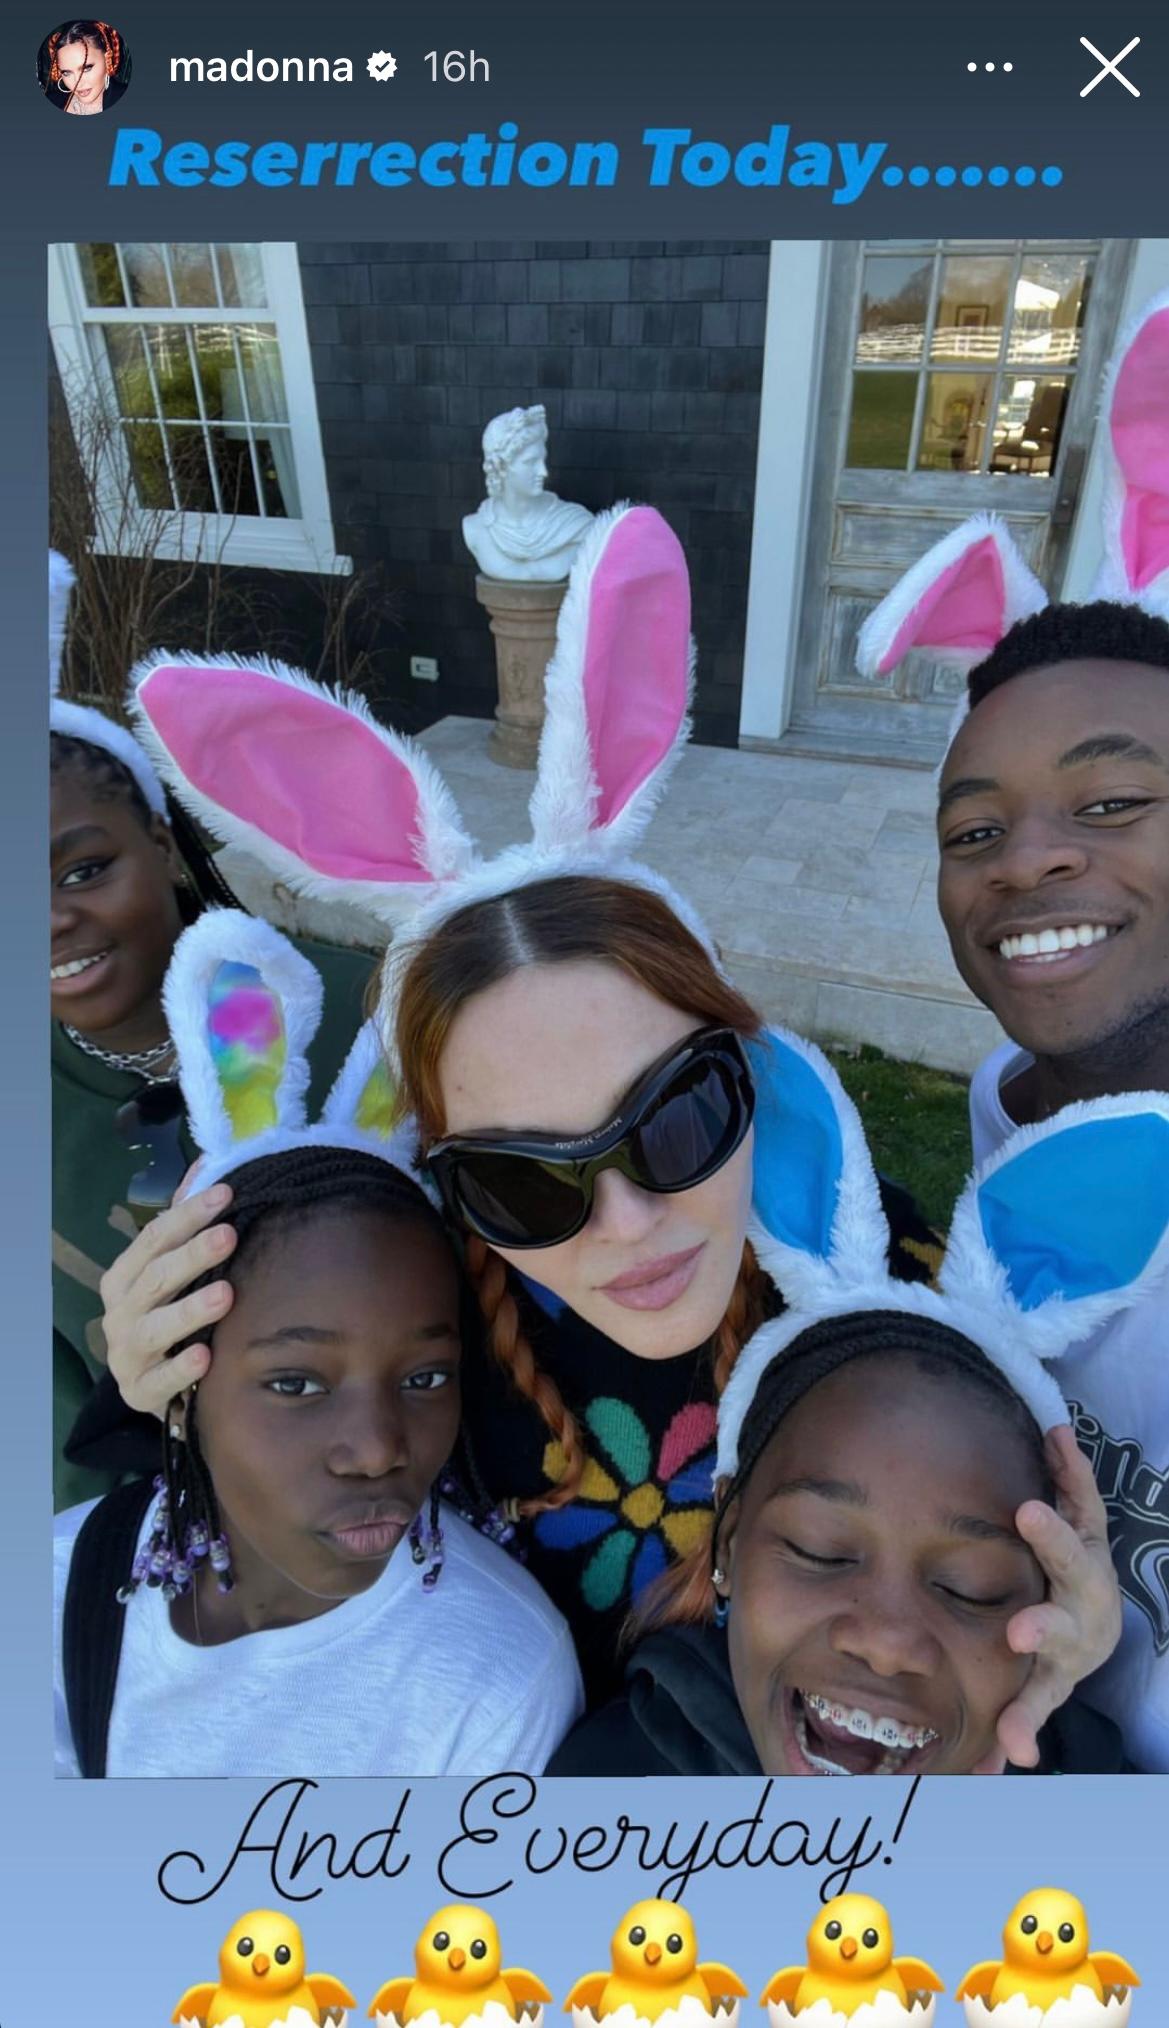 Madonna and her family celebrated Easter